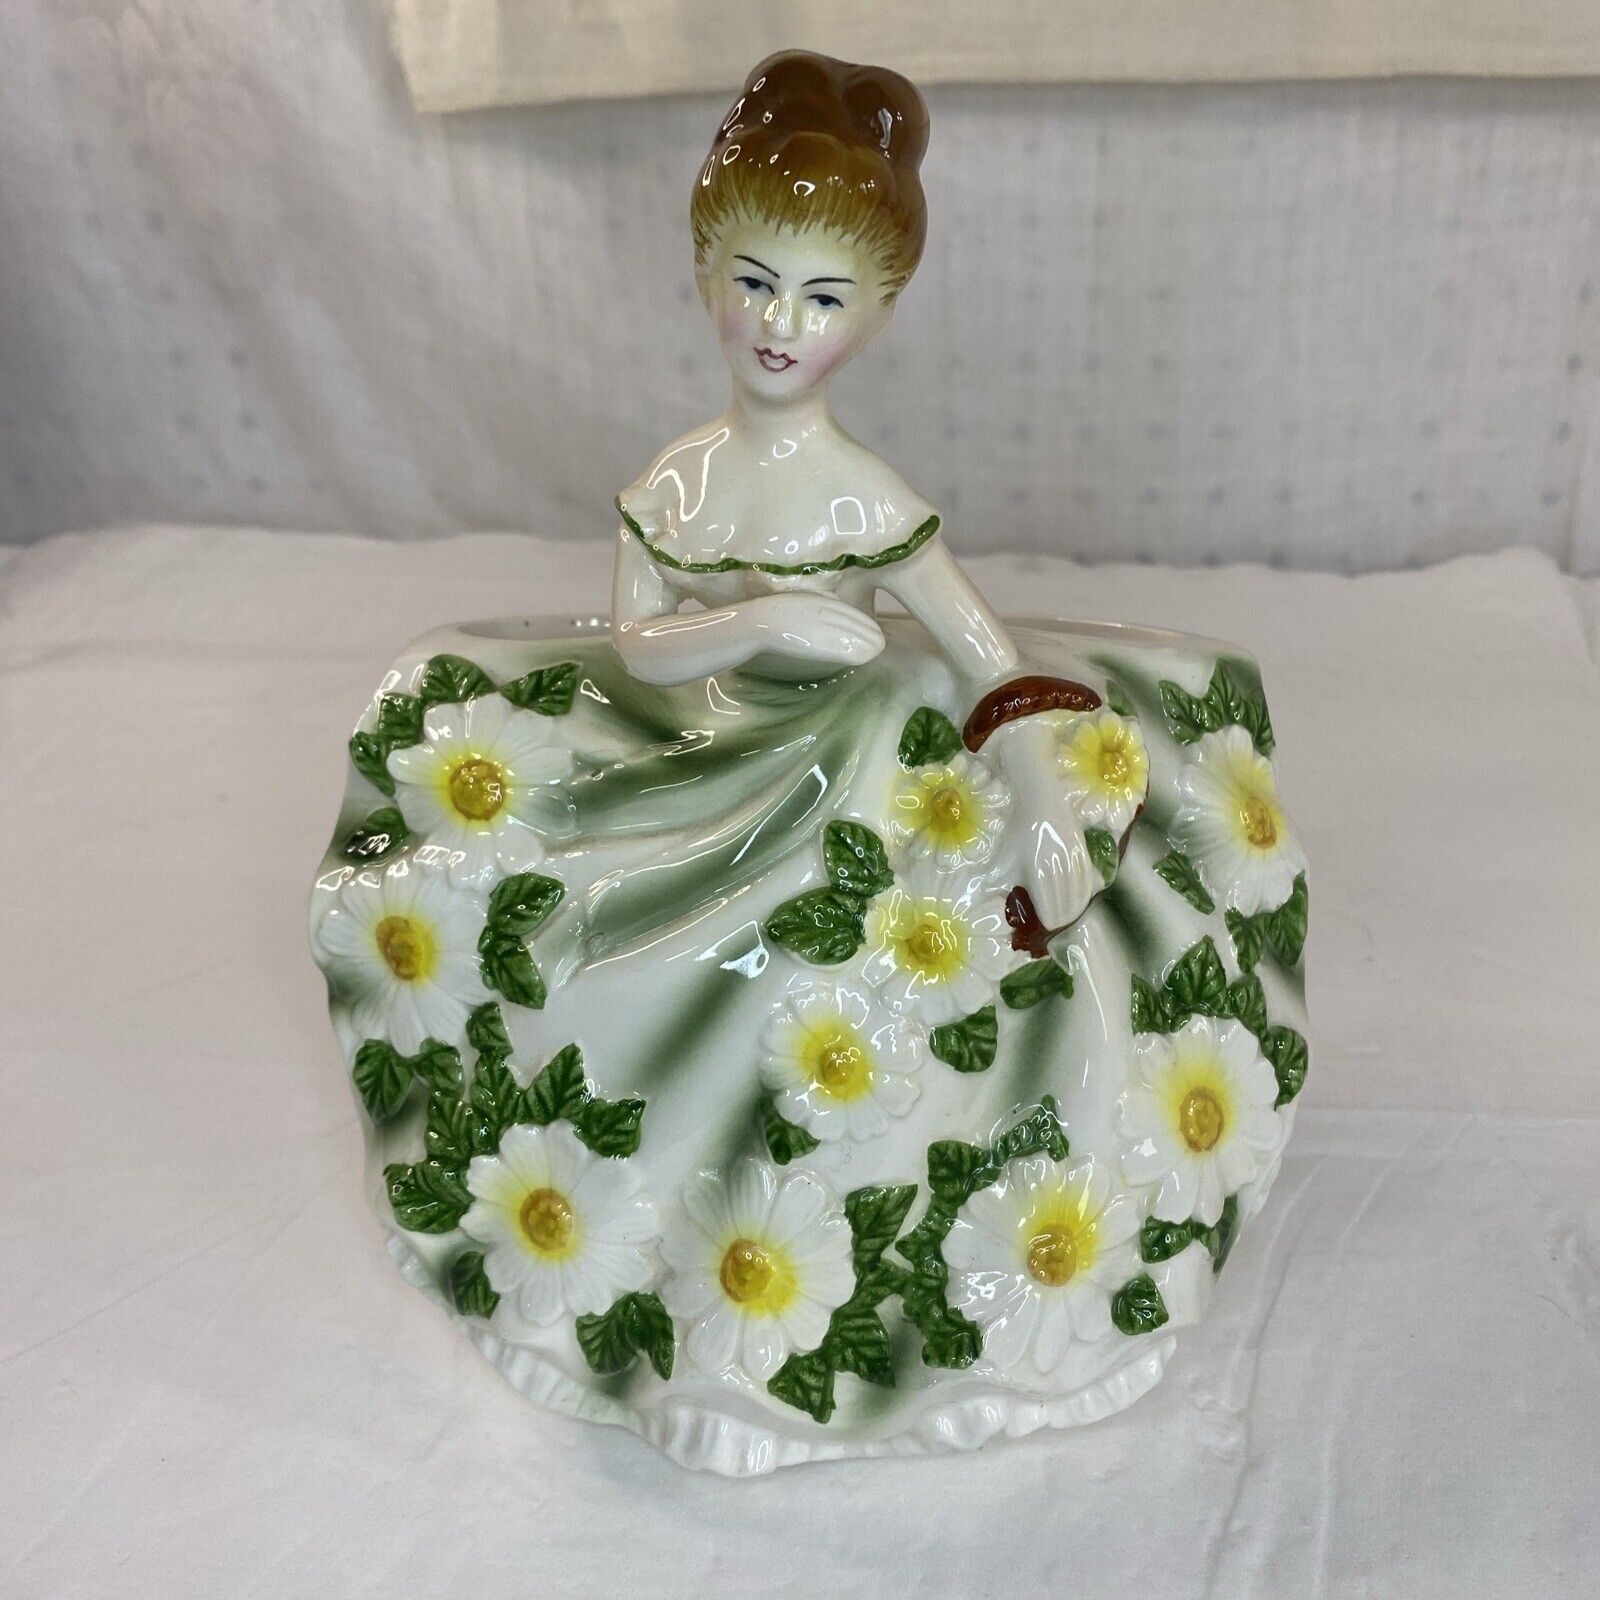 Vintage Rubens 4131 Yellow Lady Ceramic Planter in Floral Dress and Basket